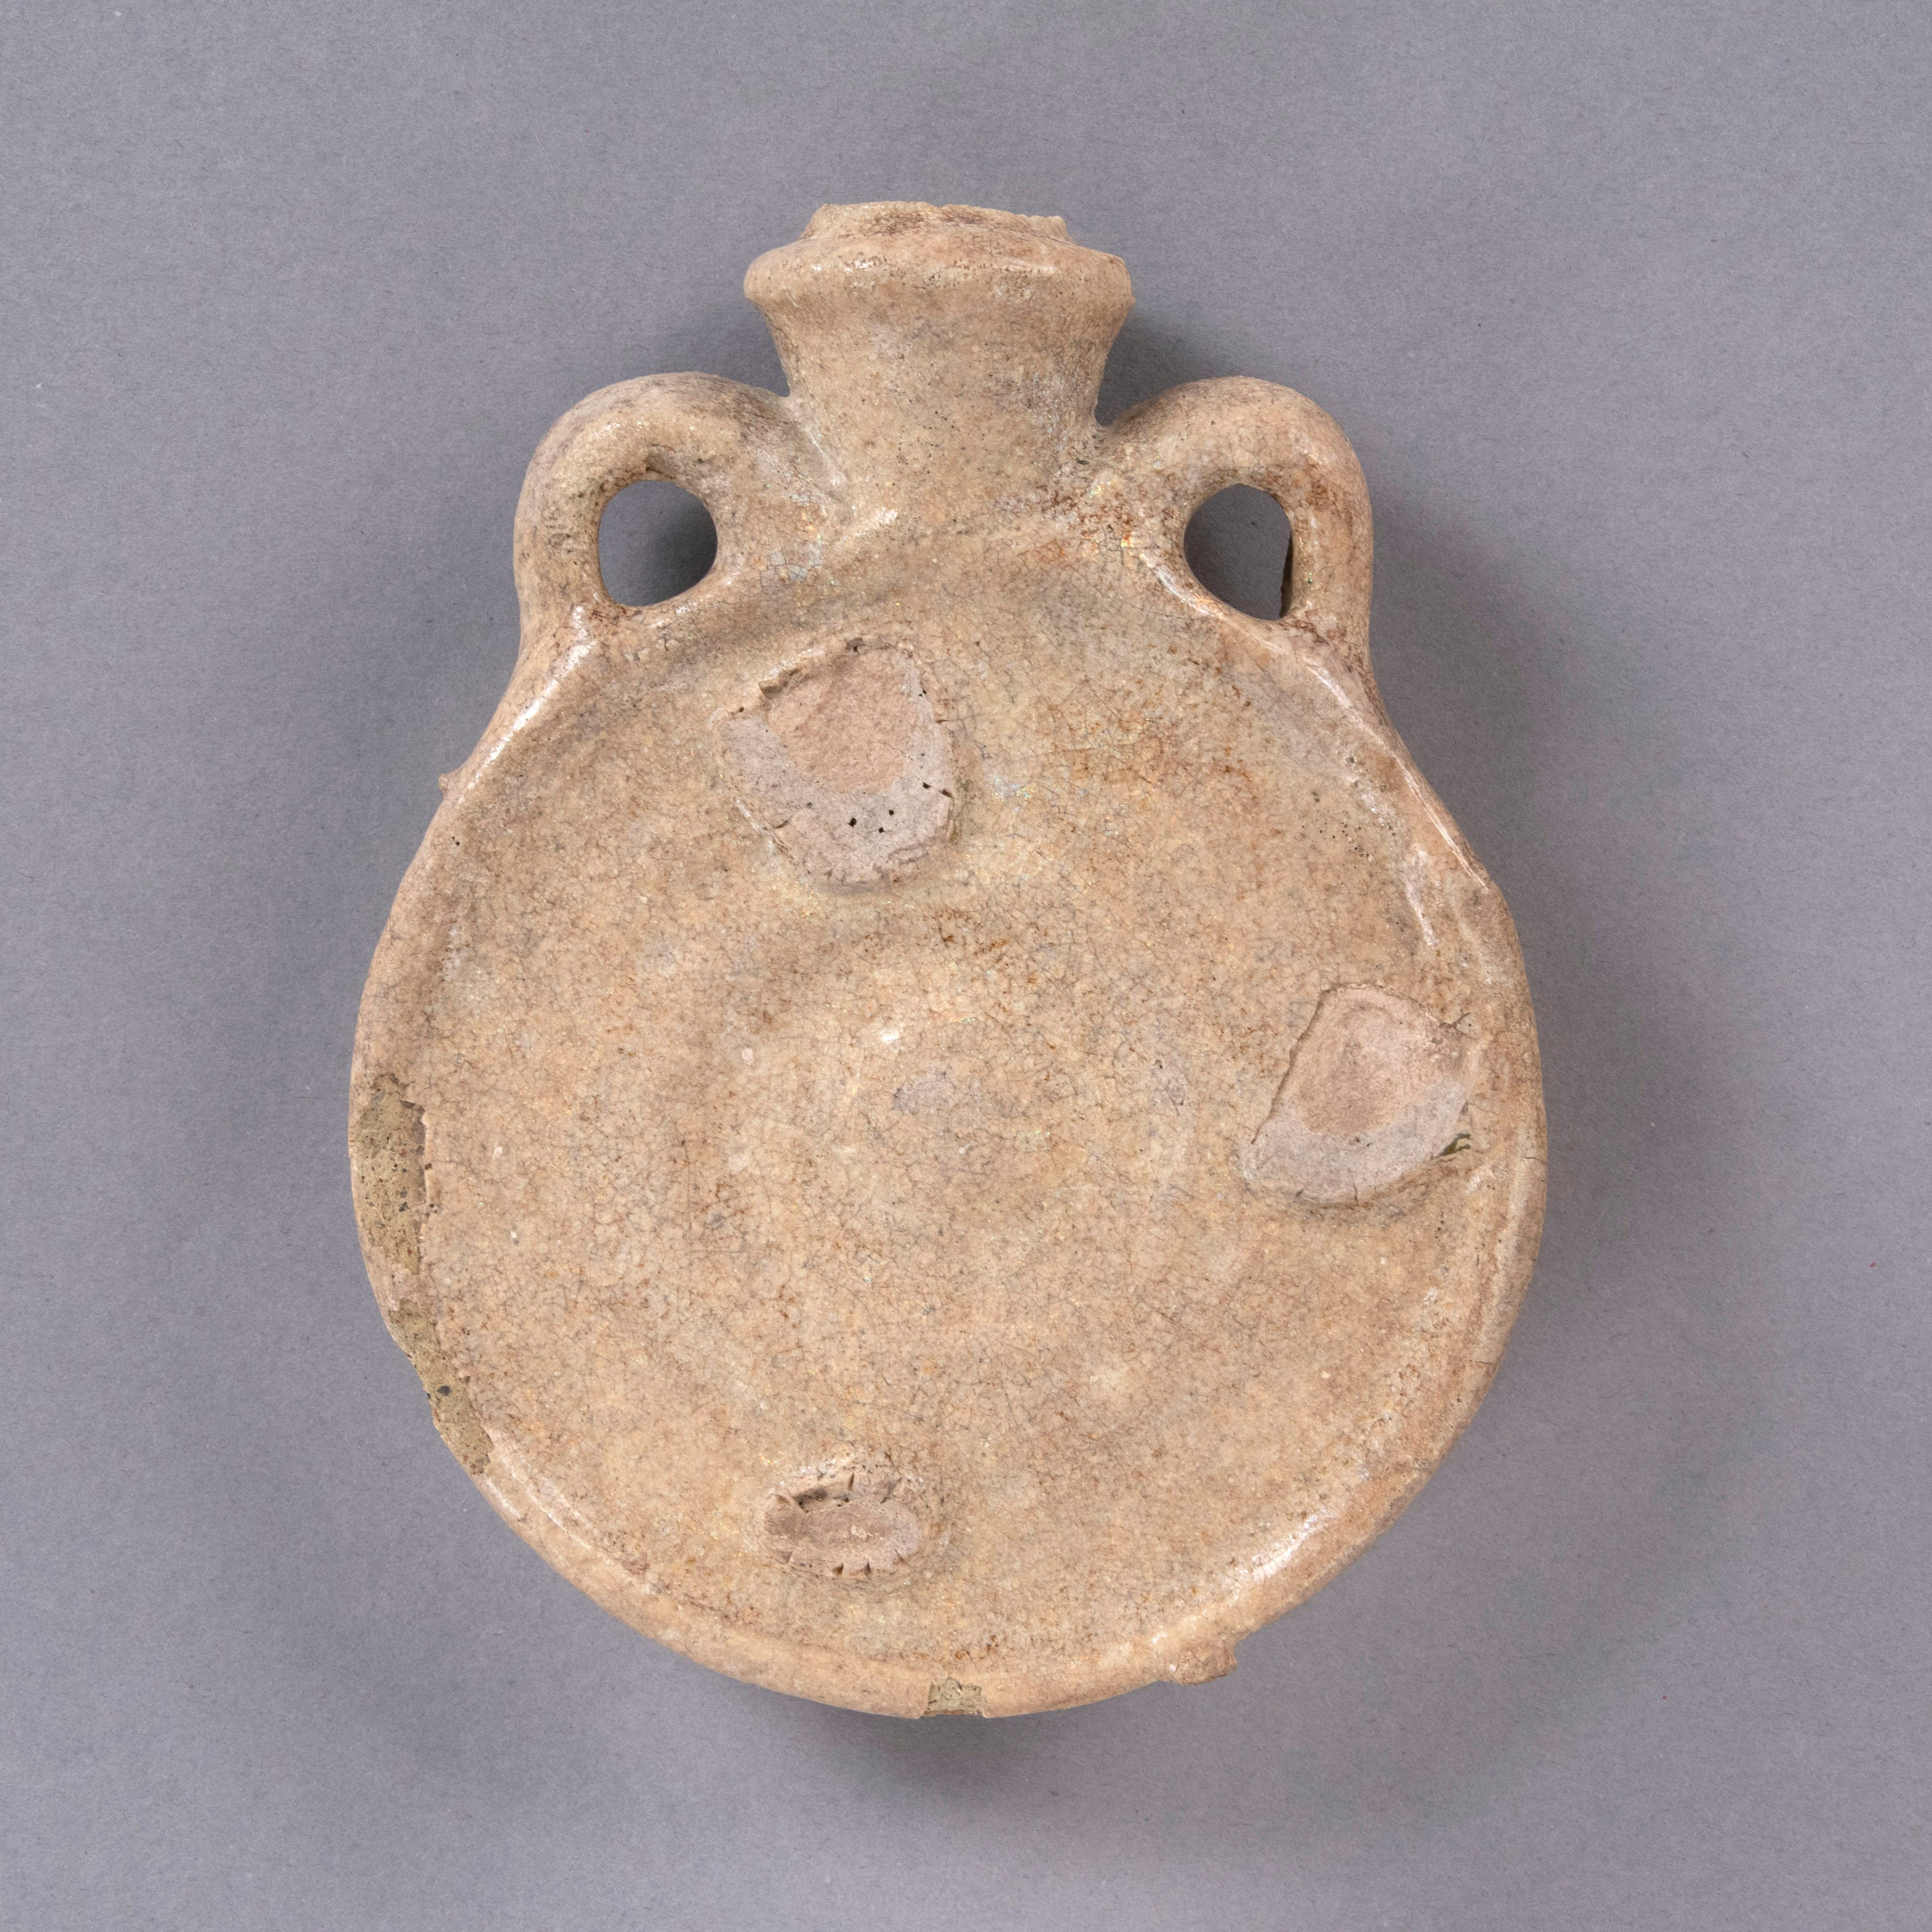 Tan, rounded pilgrim flask resembling a canteen. The object has two handles protruding near its spout.